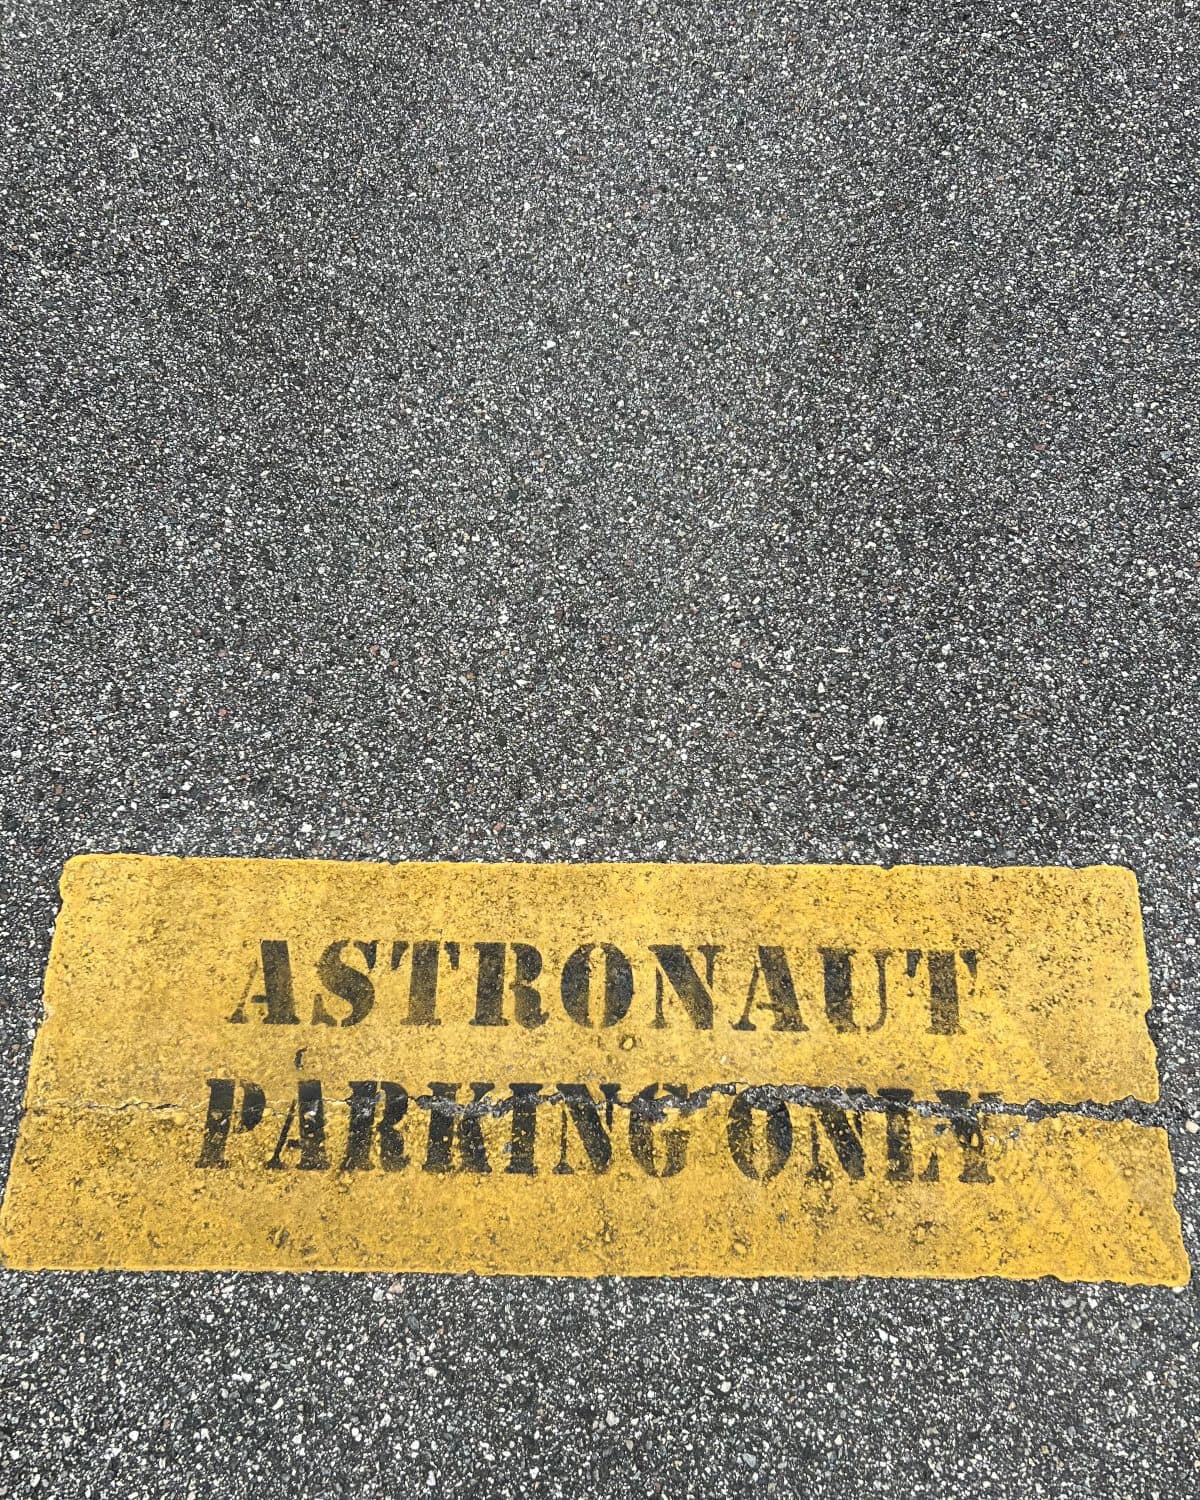 A look at the parking space Aerospace Engineering student Connor Arnold wants to use one day. (Photo: Connor Arnold)